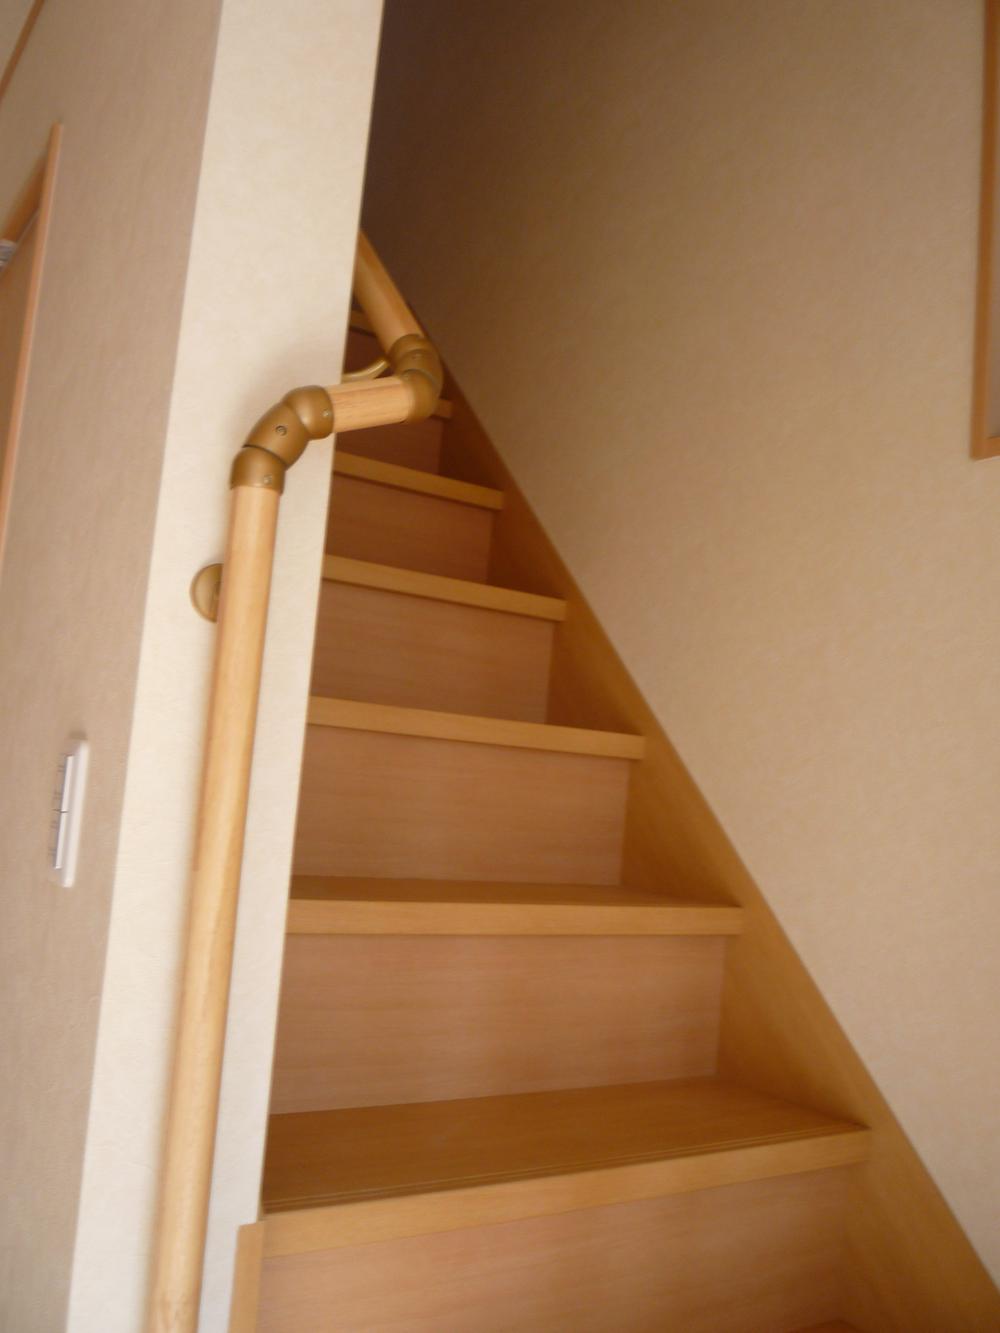 Same specifications photos (Other introspection). Stairs